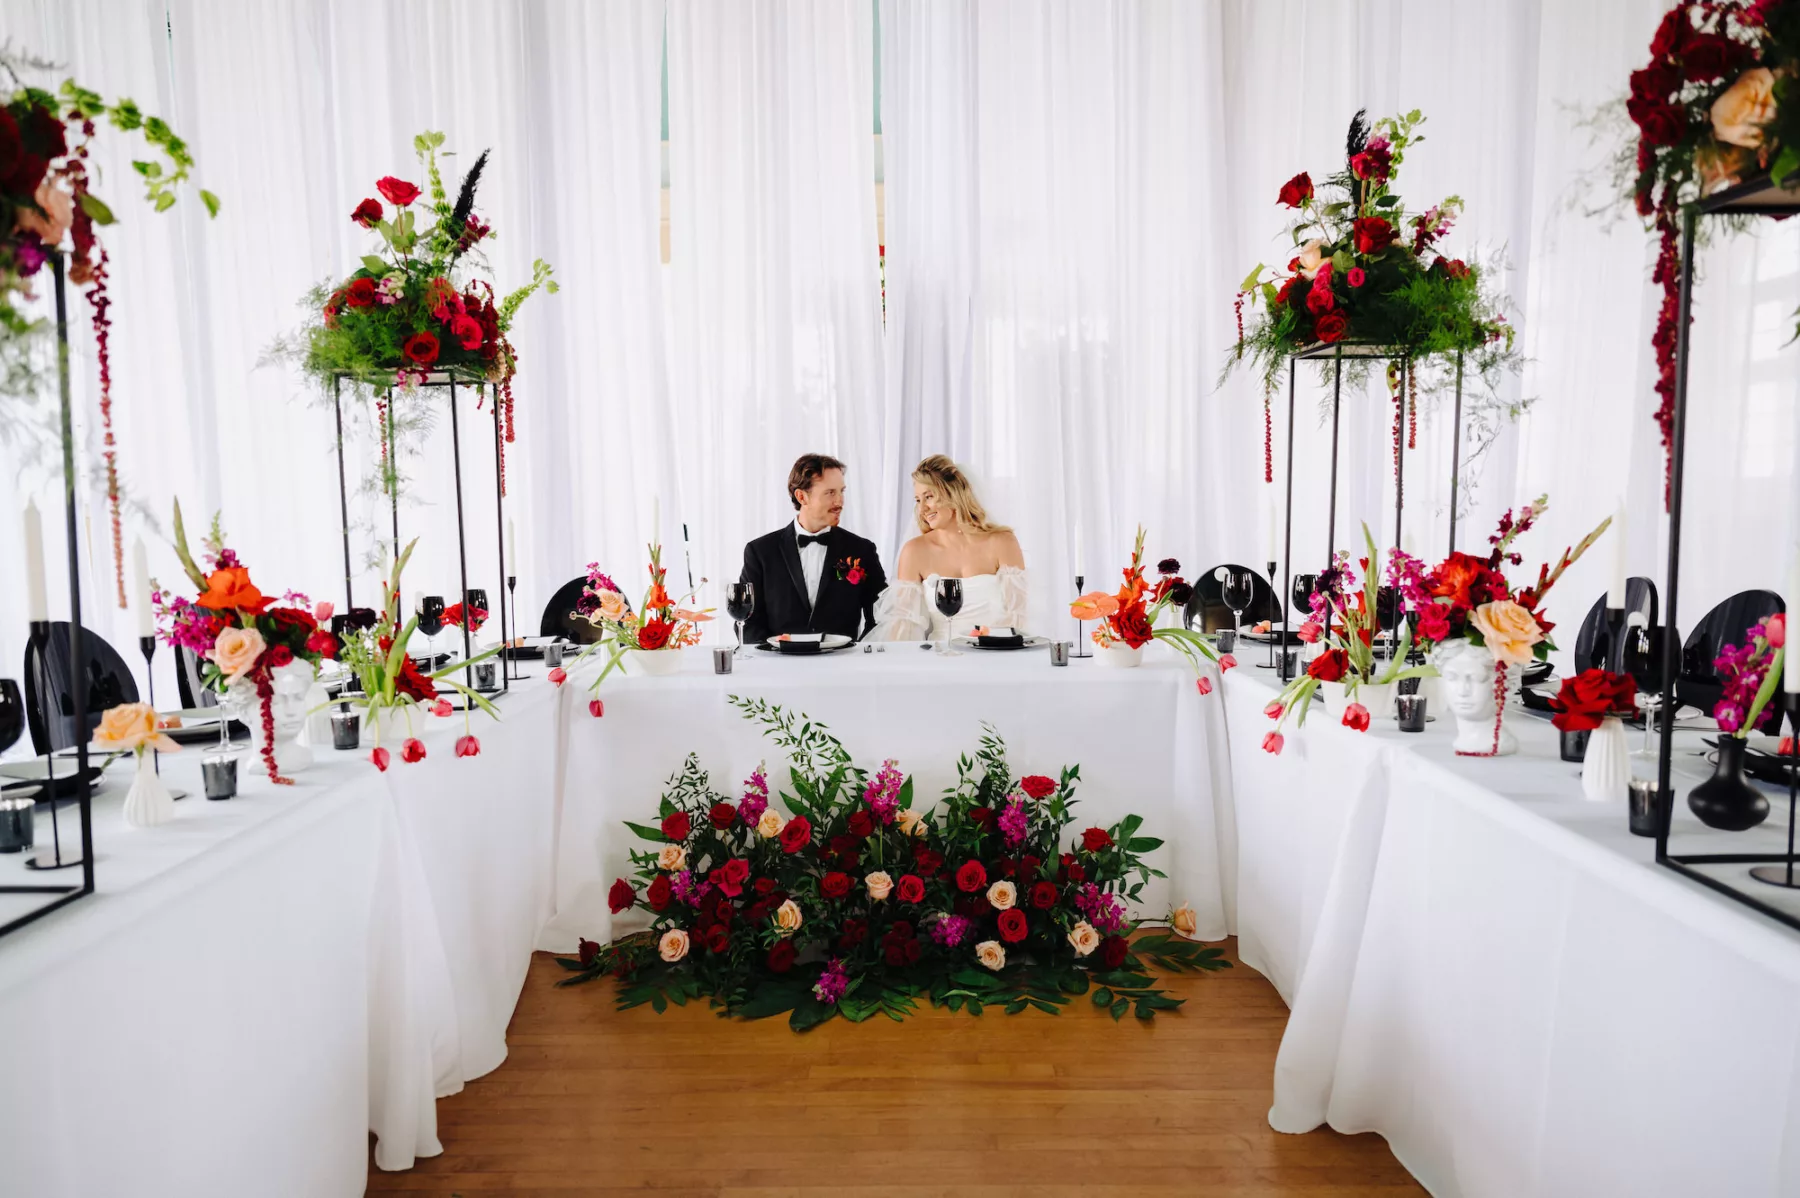 Modern Black and Pink Italian Inspired Wedding Reception | U-Shaped Table Setting | Greenery, Pink and Red Rose Flower Arrangement Decor Ideas | Tampa Bay Florist Save The Date Florida | Ybor Event Planner Eventfull Weddings | Venue Cuban Club